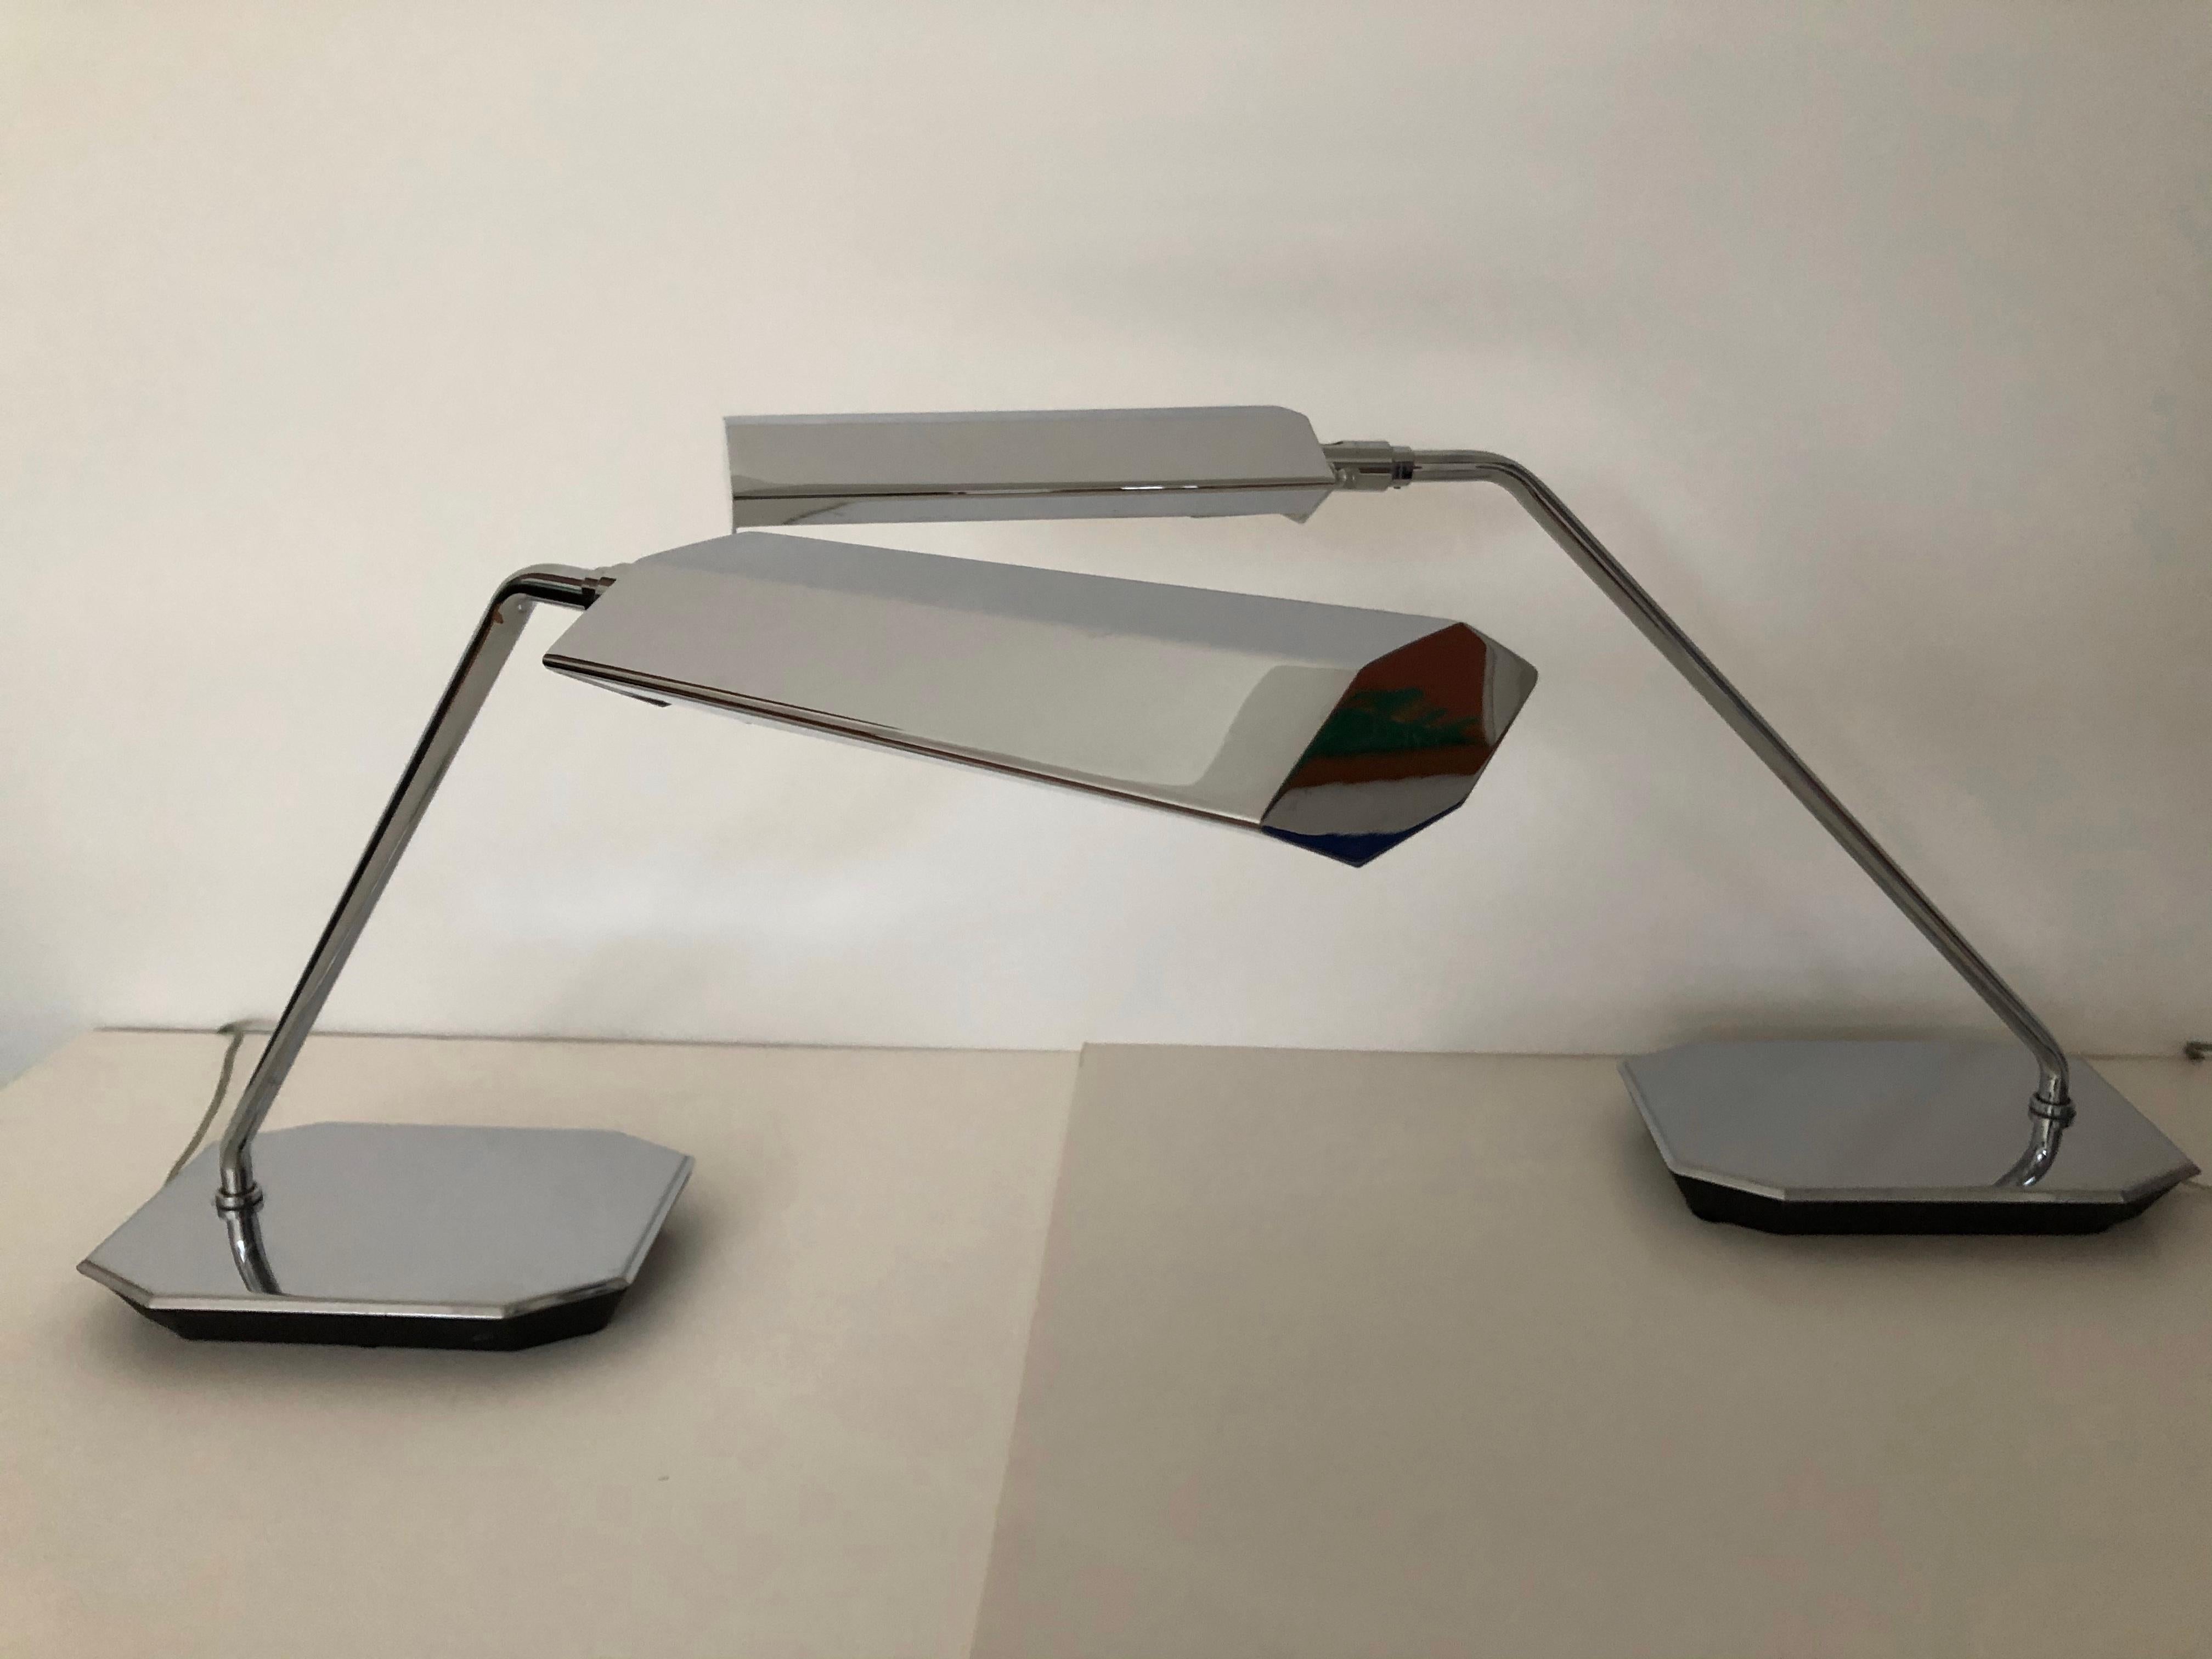 Mirror chrome Koch & Lowy swing arm adjustable desk / table lamps, vans adjust head to back light and area and appear more sculptural.
when you adjust shade up towards wall for back light, the measurement is 23.50 to top.